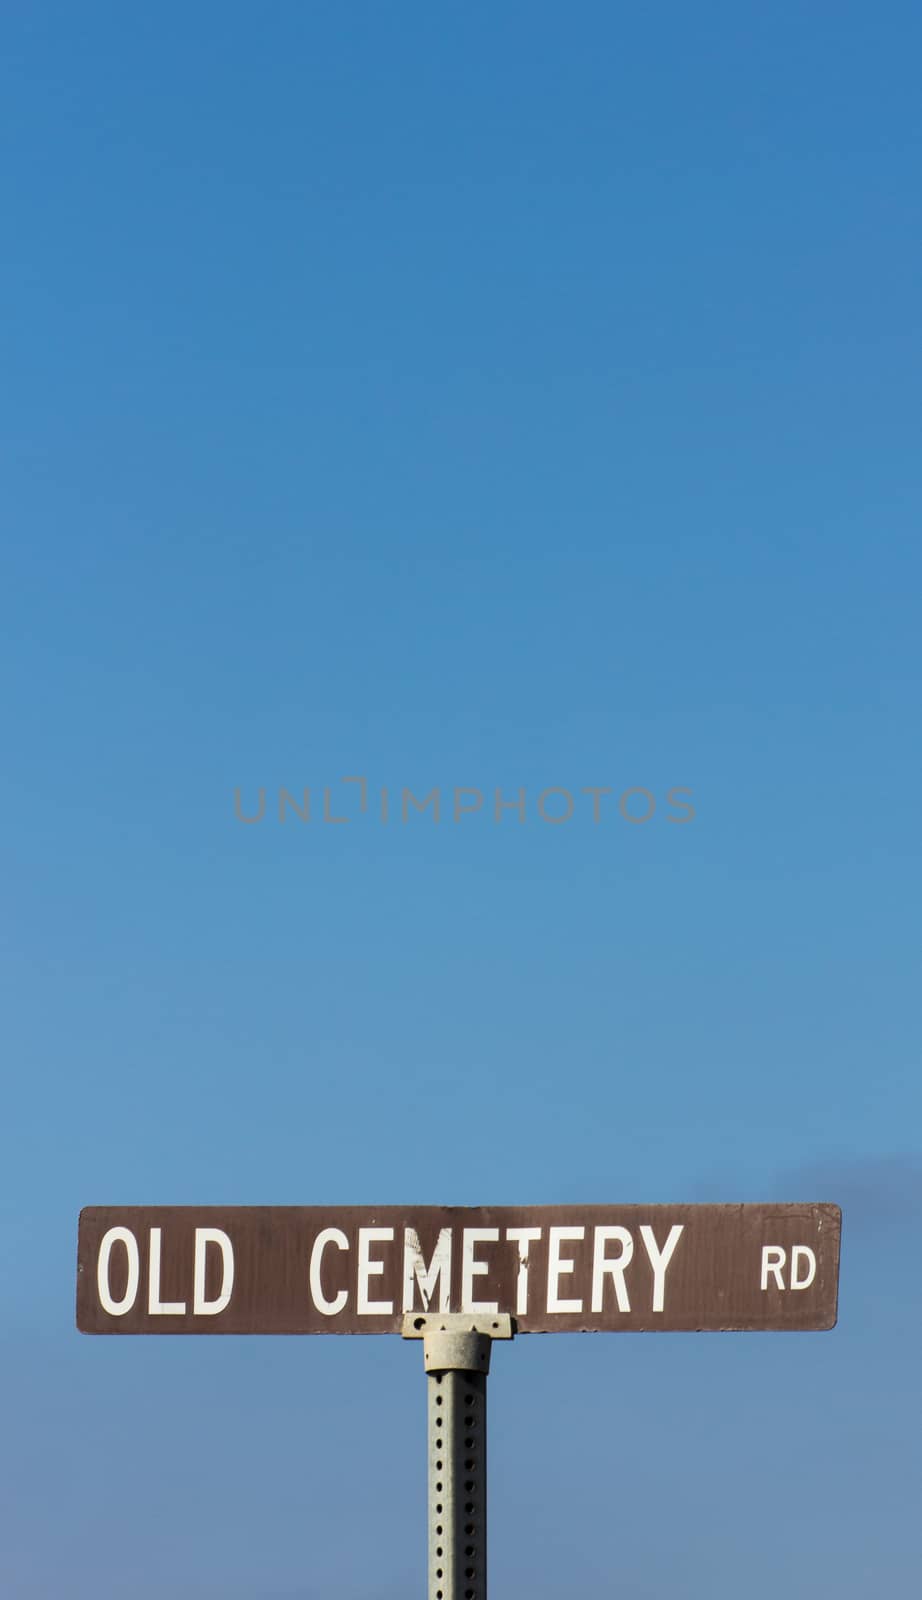 Rusty Sign to Old Cemetery Road in Vertical